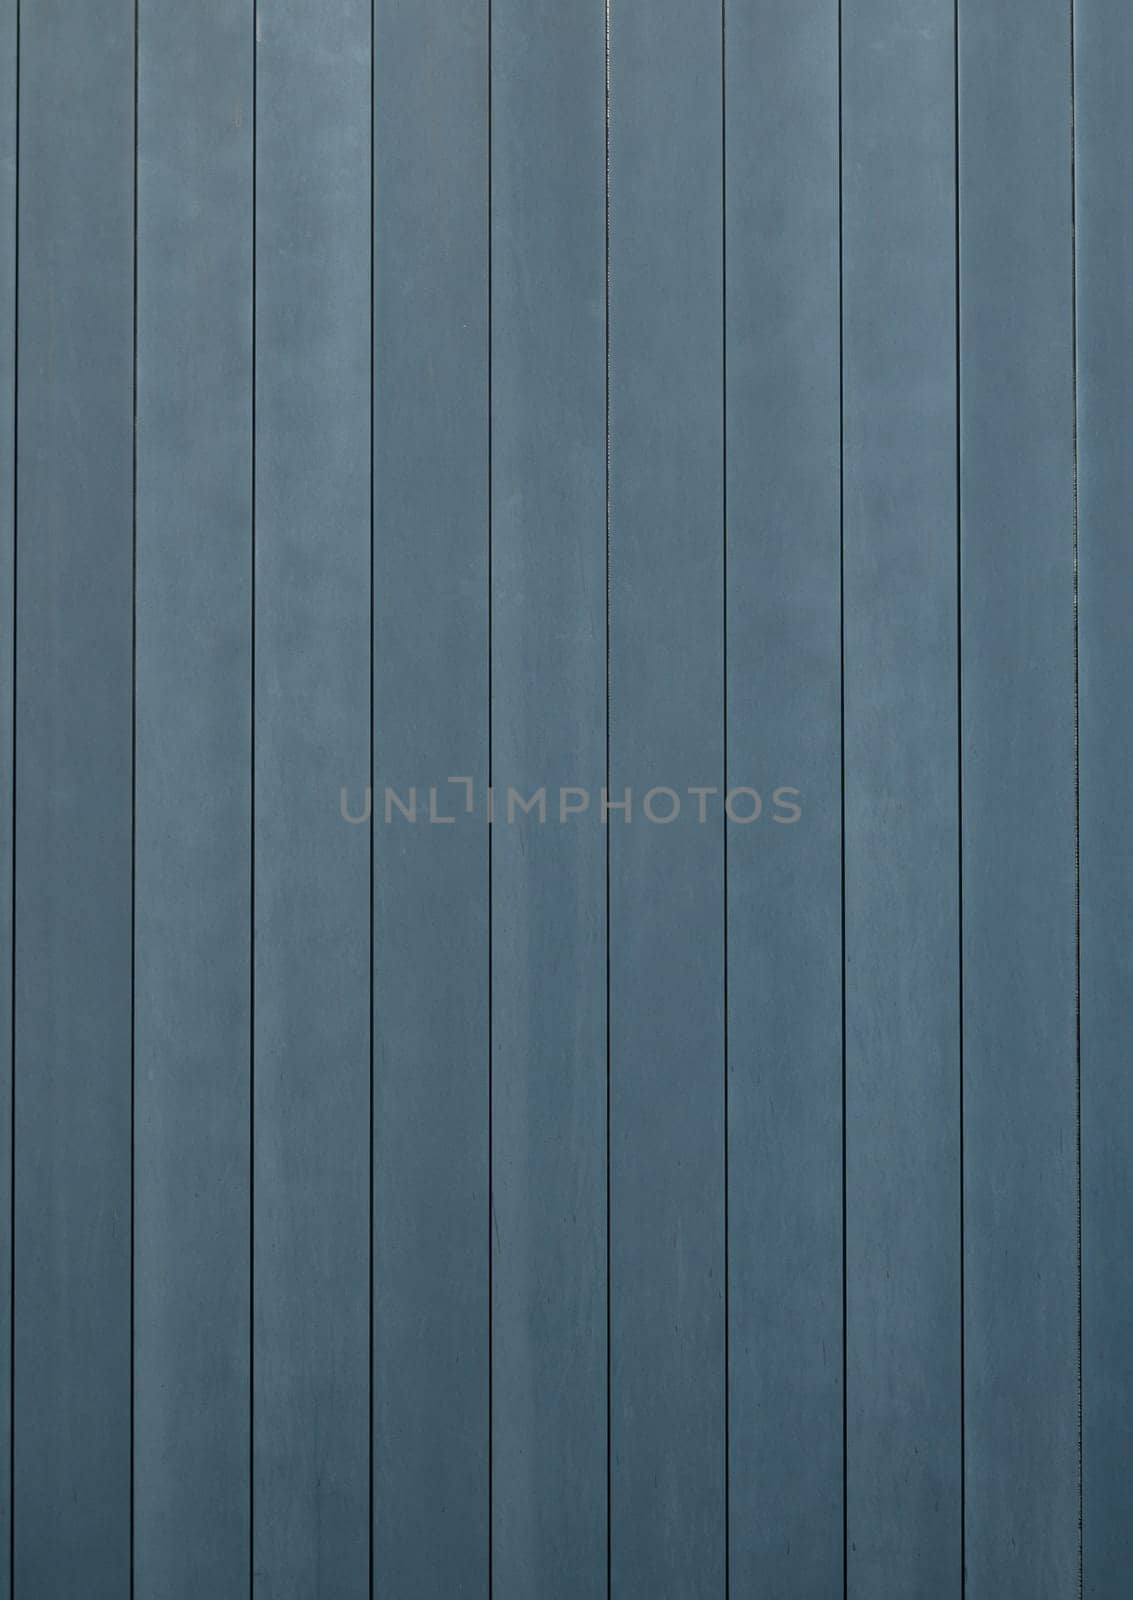 facade of a large store as a background, gray siding 1